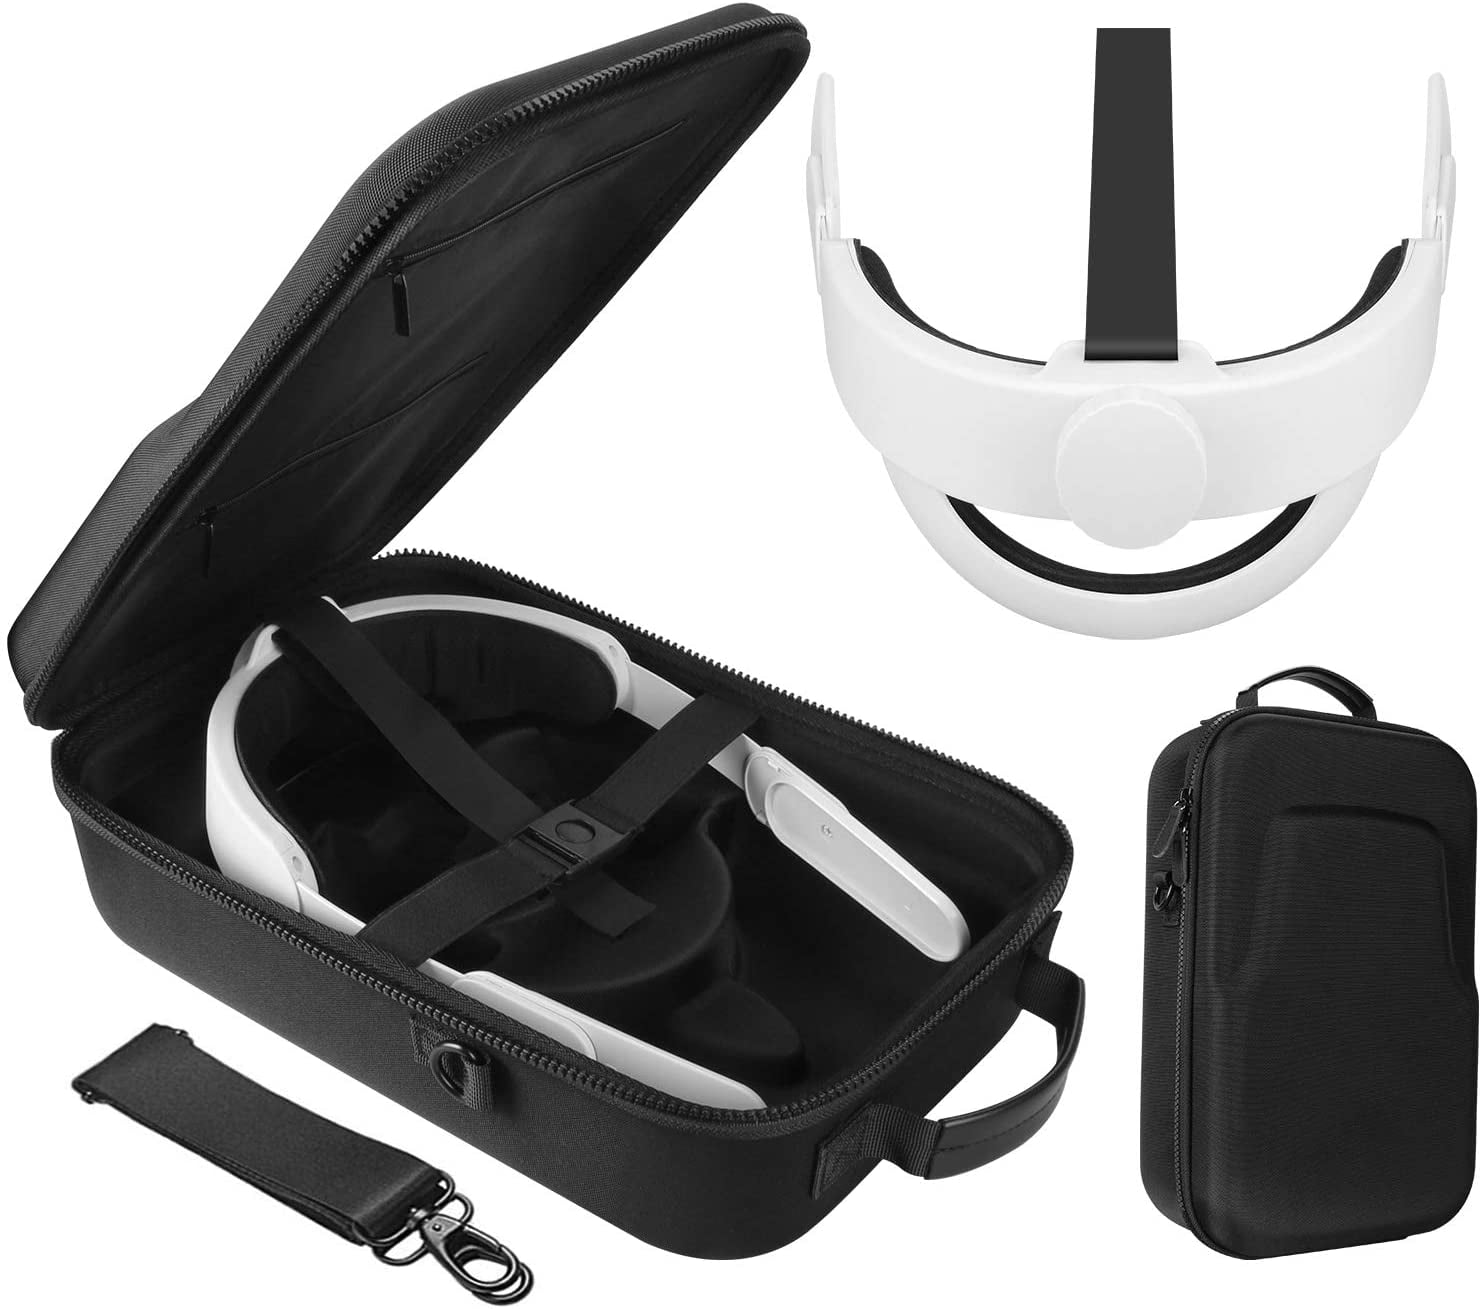 Travel Crossbody Backpack Shoulder Bag Waterproof Halo Strap and VR Accessories Portable Protection Black Oculus Quest 2 Carrying Case Fit for Elite Strap 